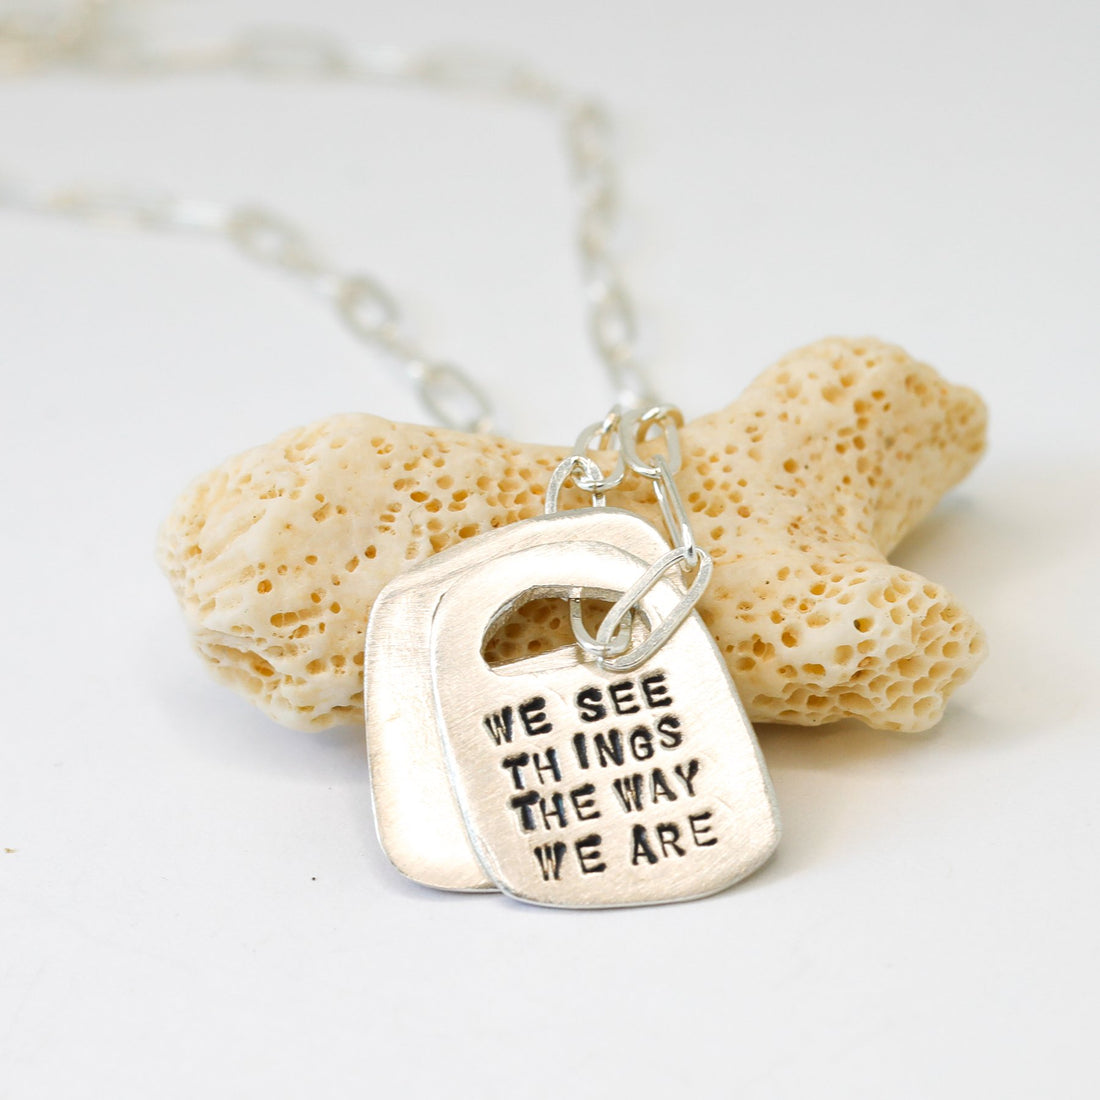 Anais Nin Rune Necklace "We do not see things the way they are. We see things the way we are" - Chocolate and Steel